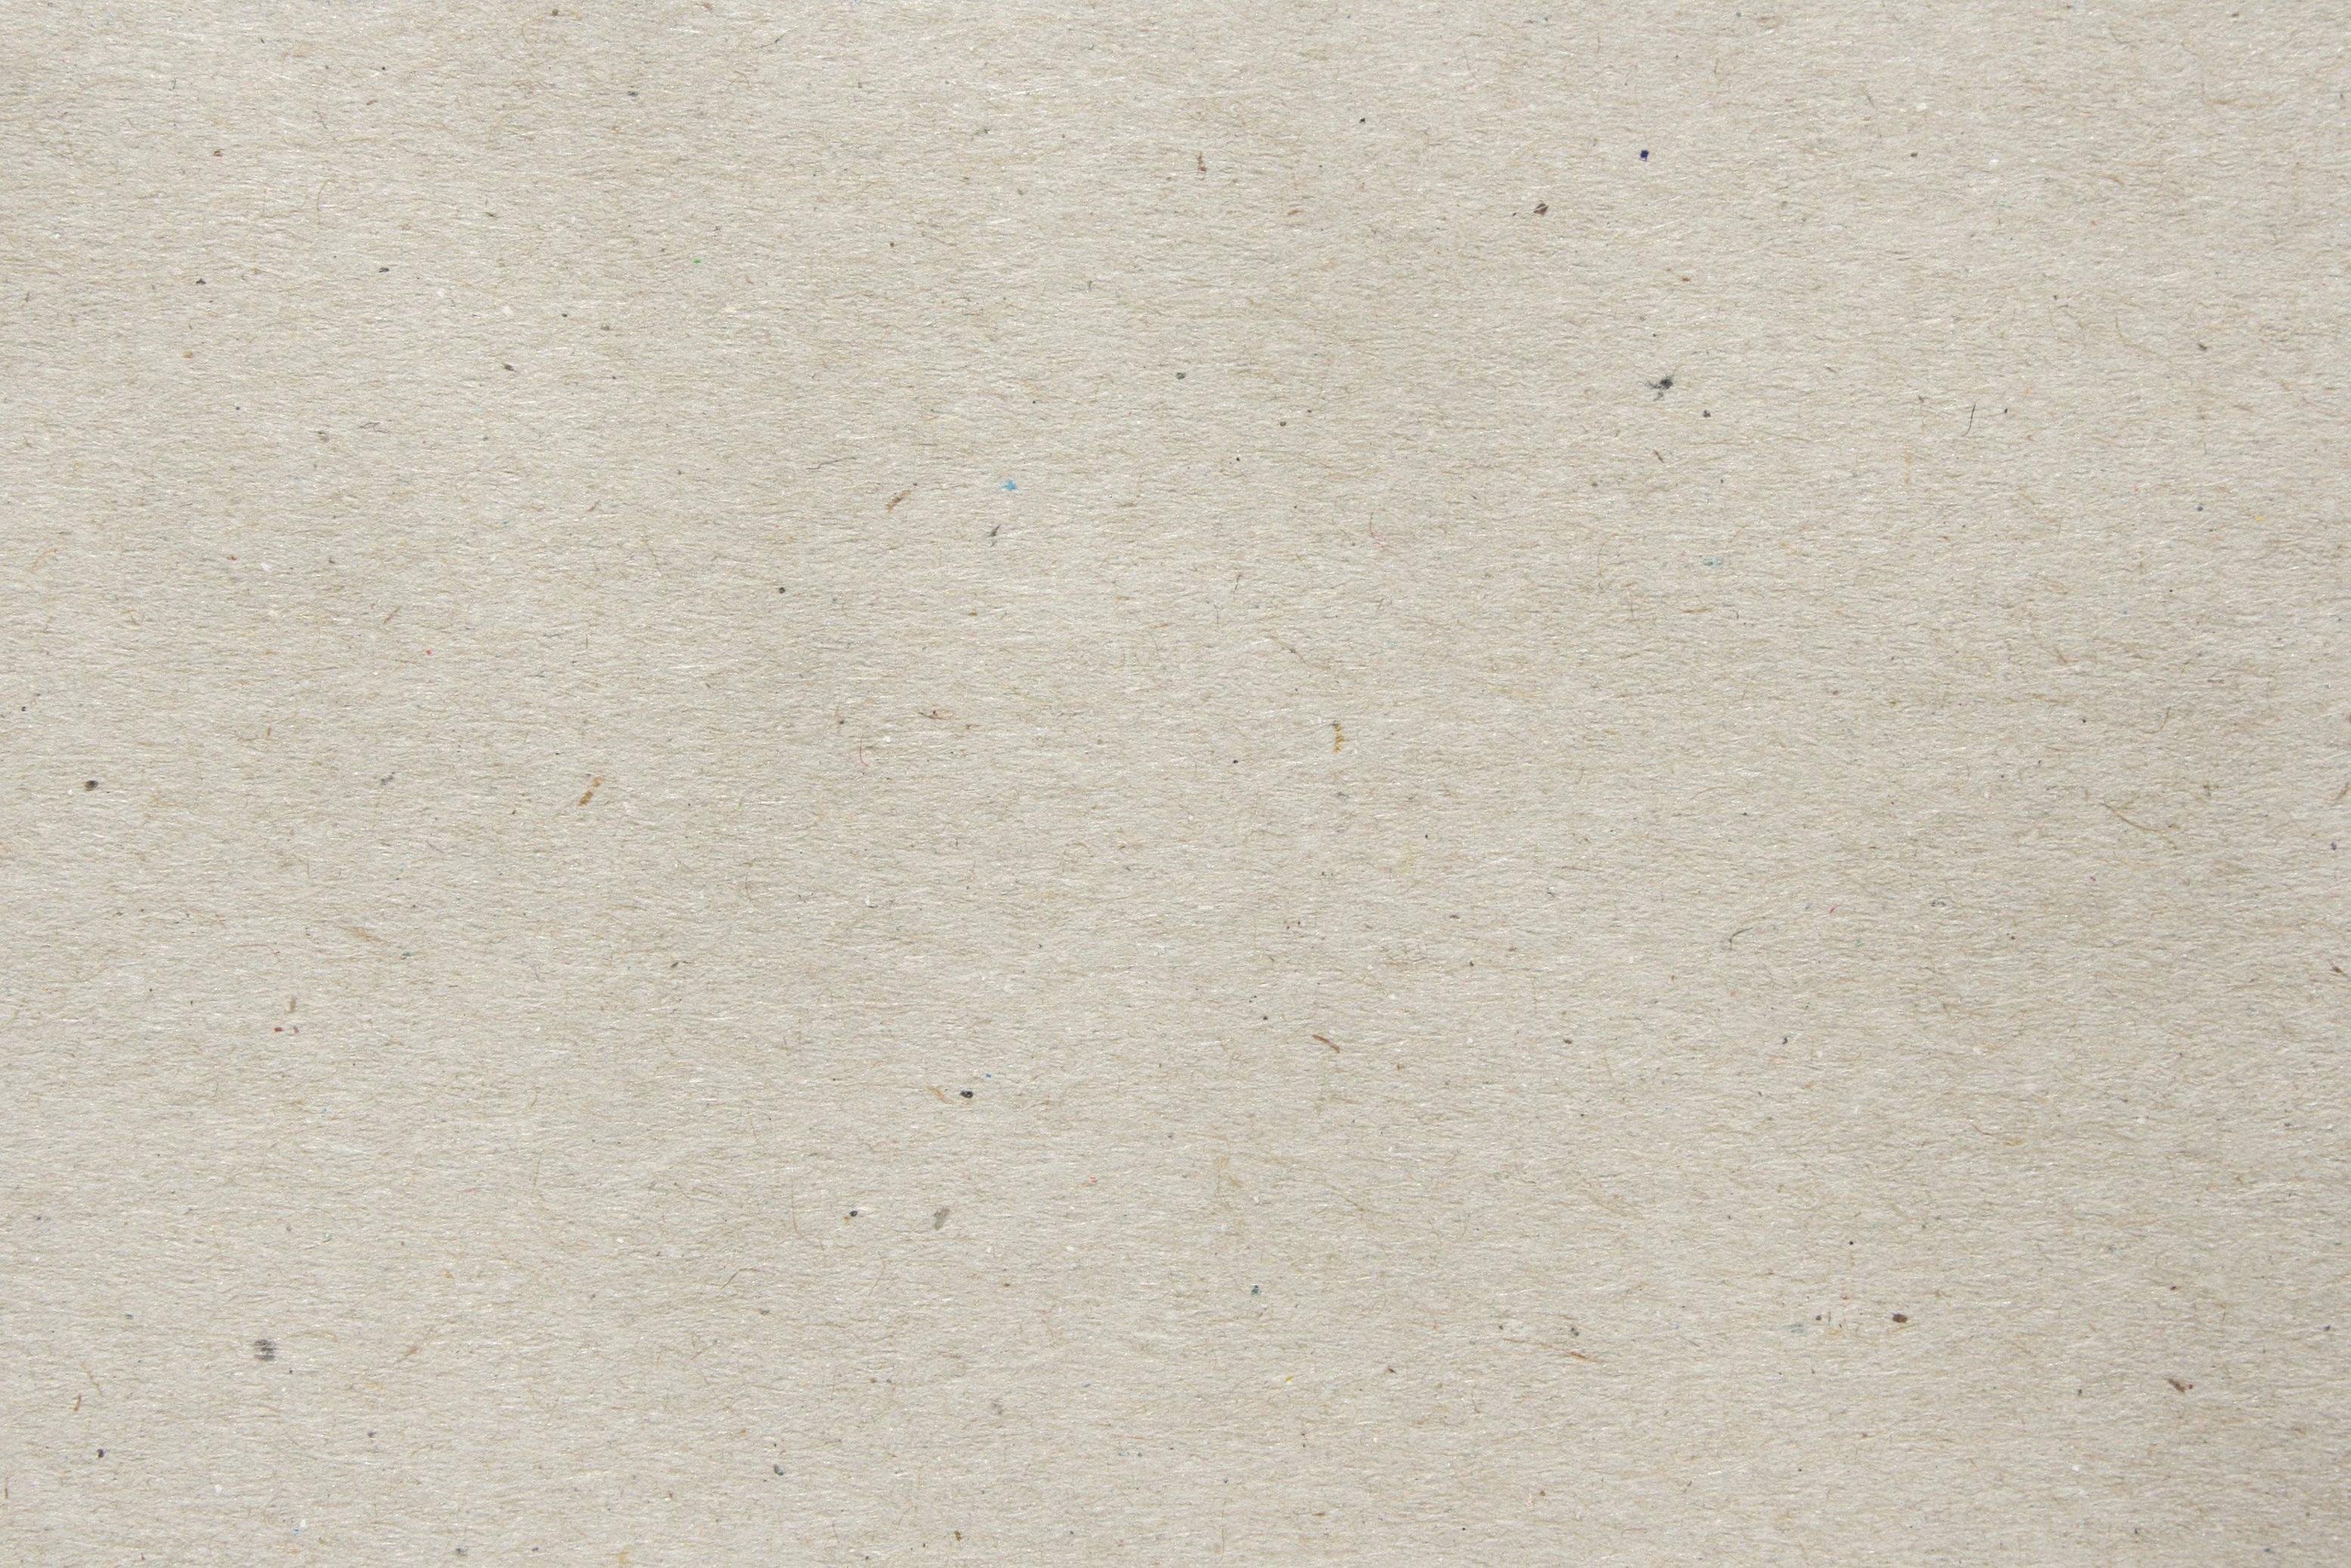 Cream Colored Paper Texture with Flecks Picture. Free Photograph